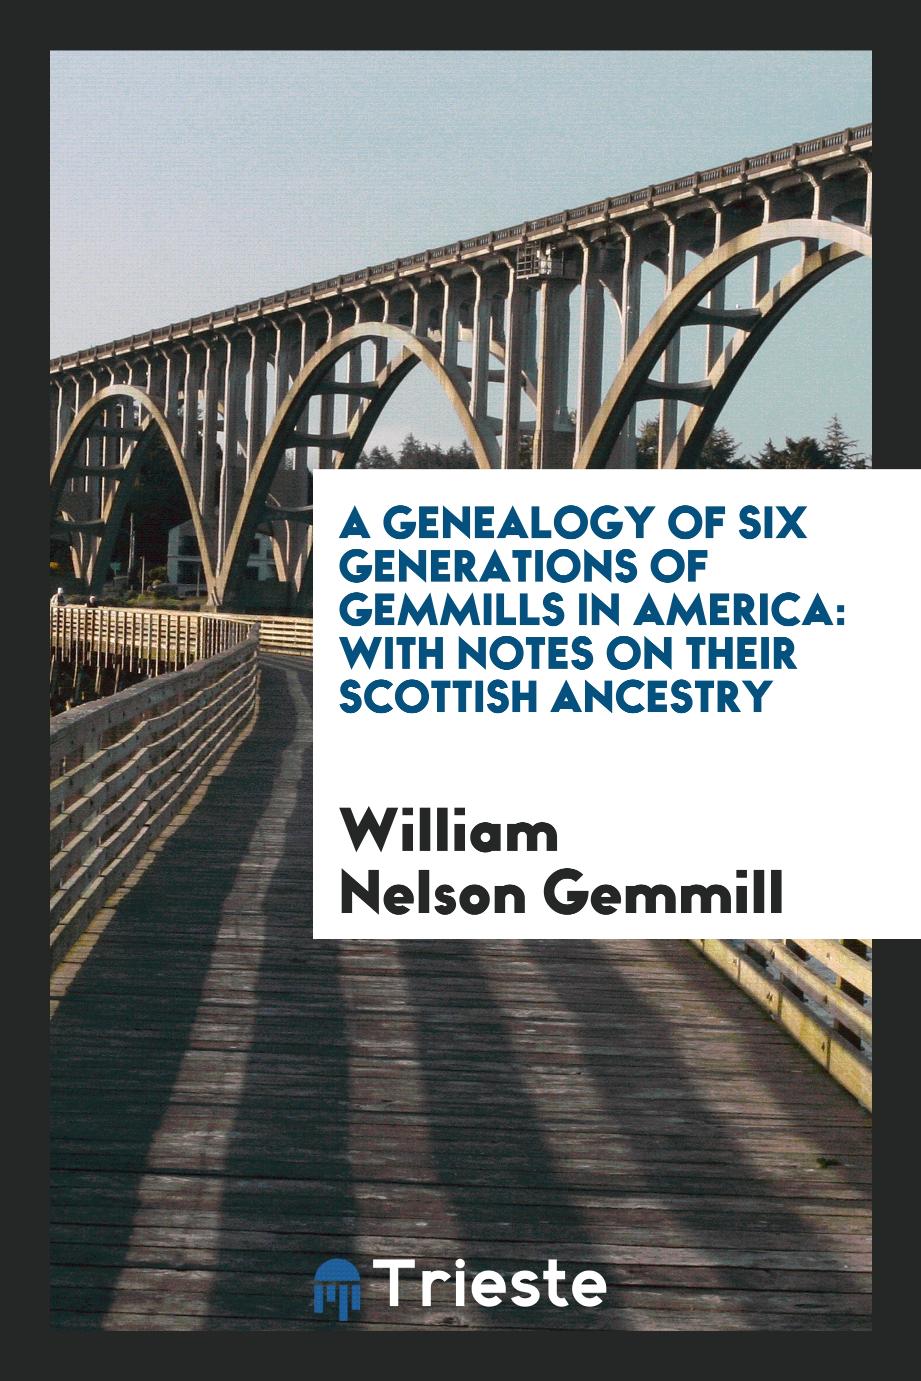 A Genealogy of Six Generations of Gemmills in America: With Notes on Their Scottish Ancestry